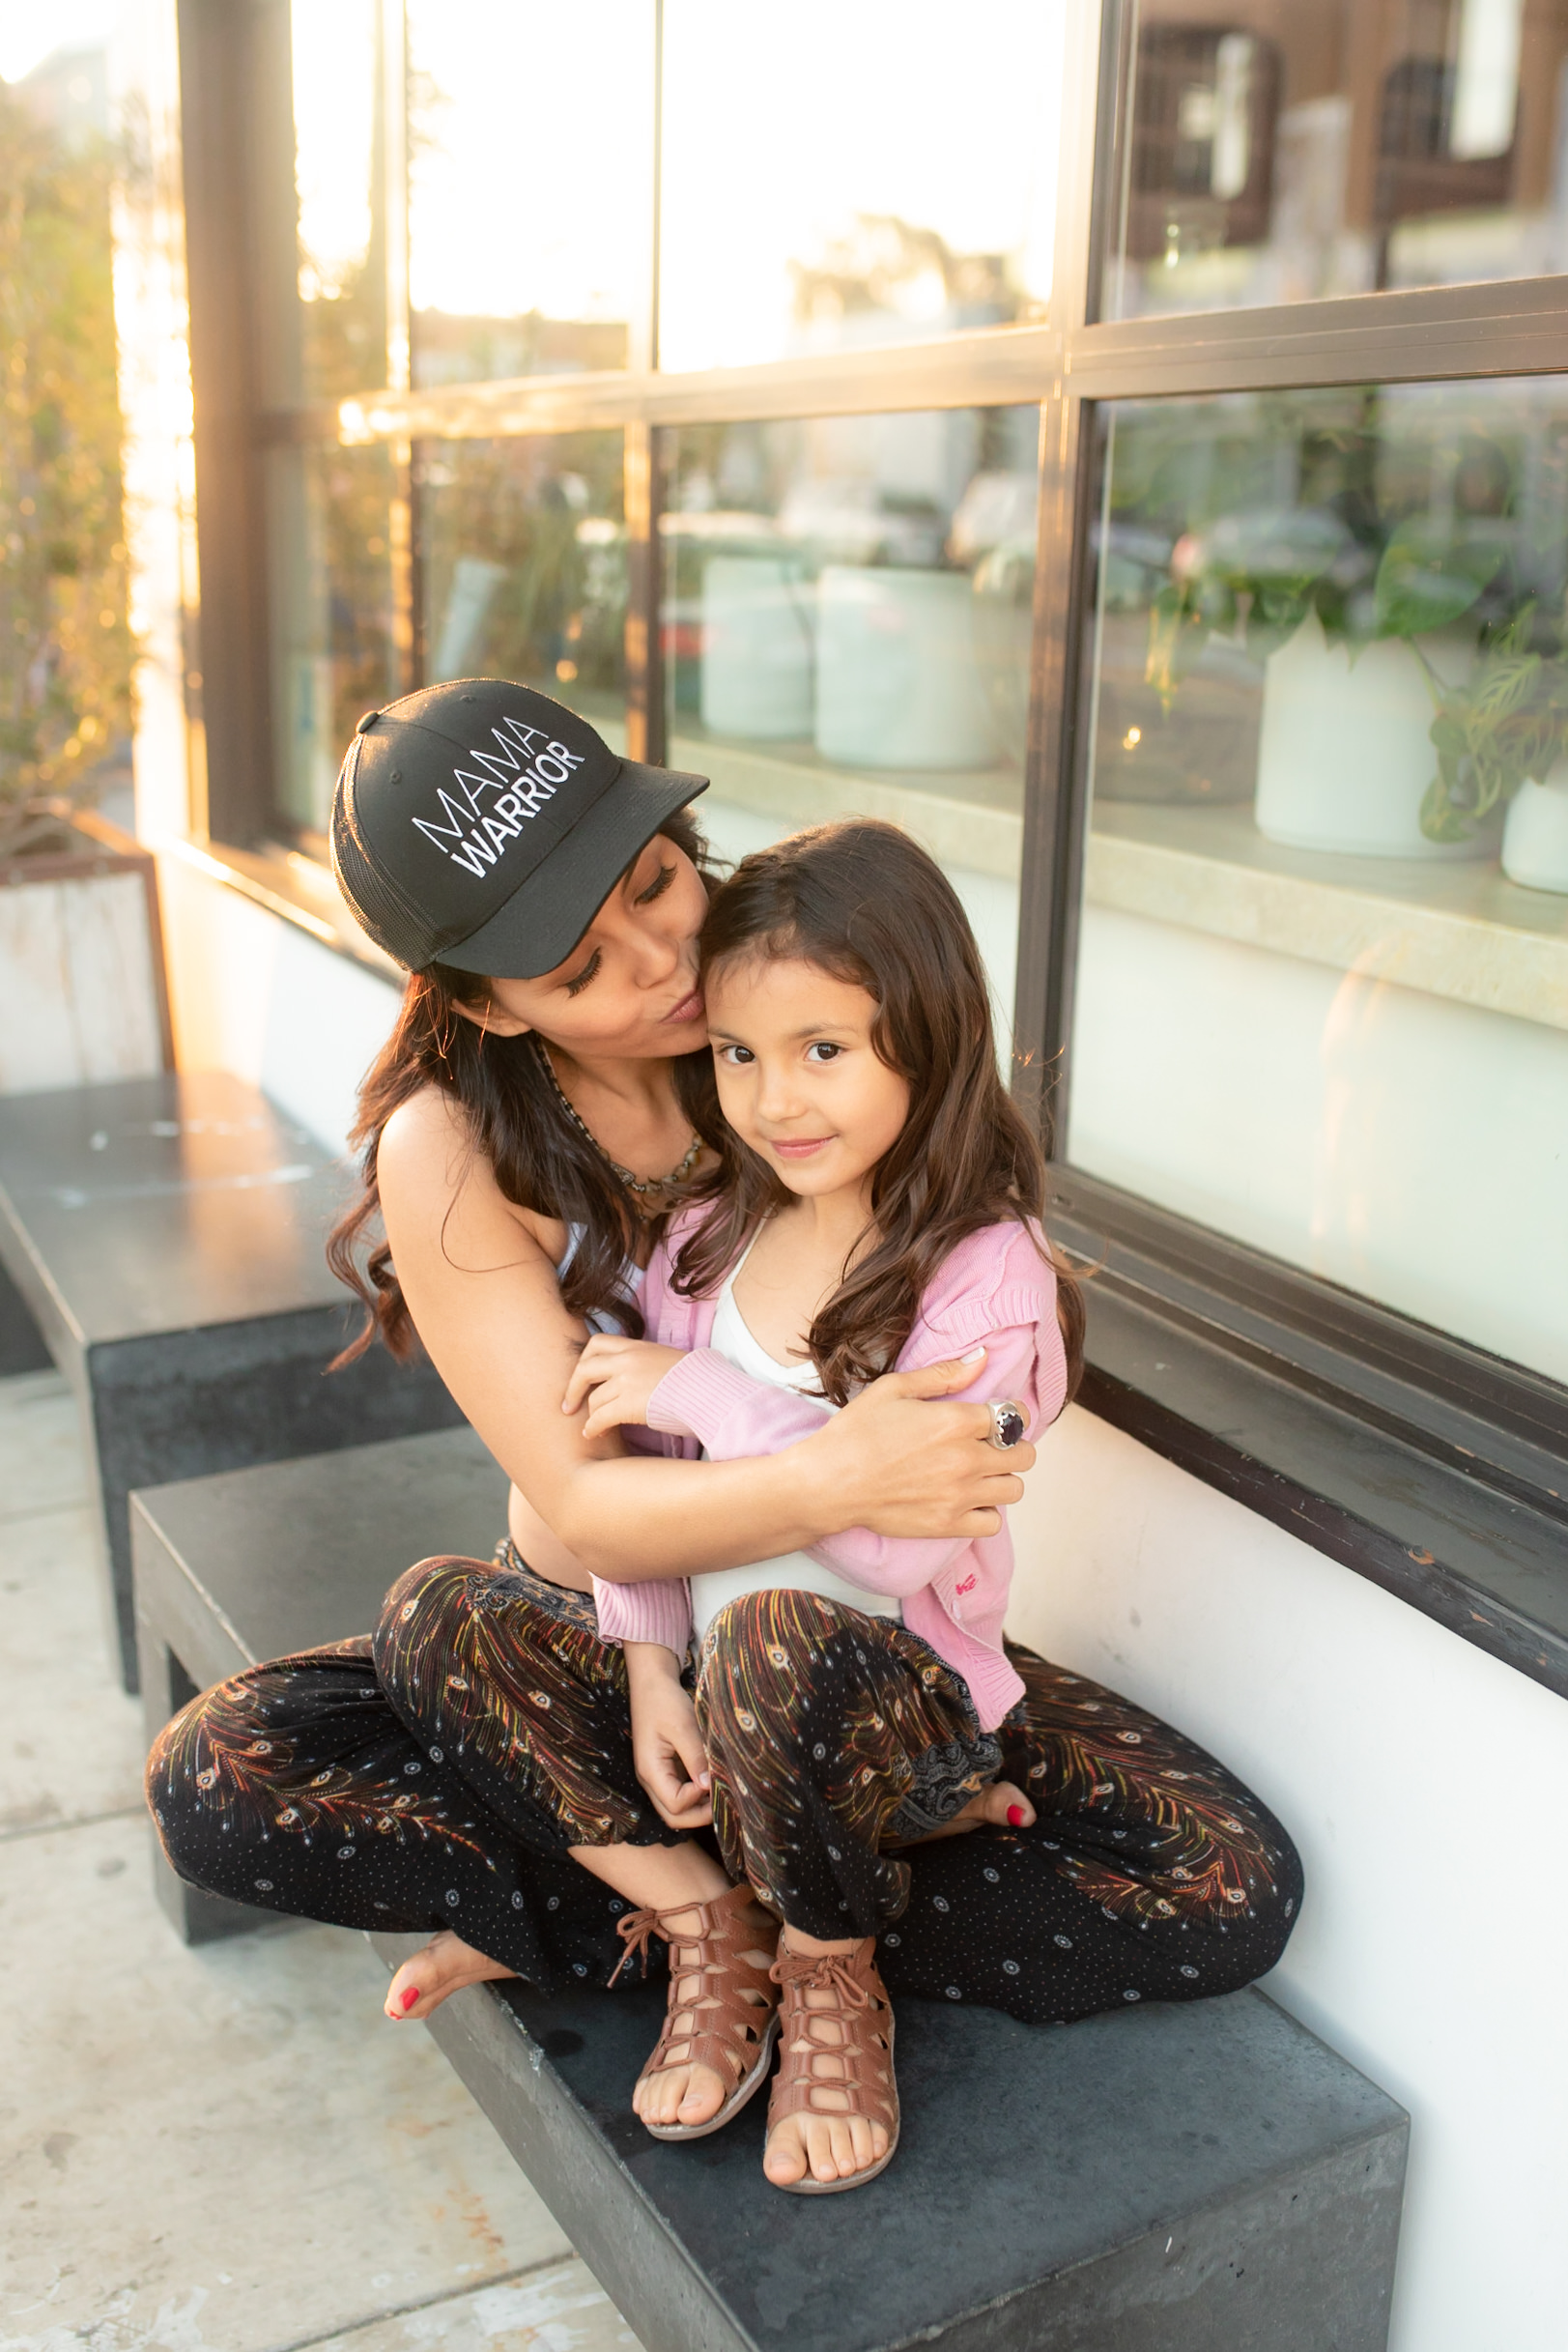  Mompreneur and manifestation coach Xandrine Ayla sitting on a bench with her daughter in her lap and giving her a kiss. 
